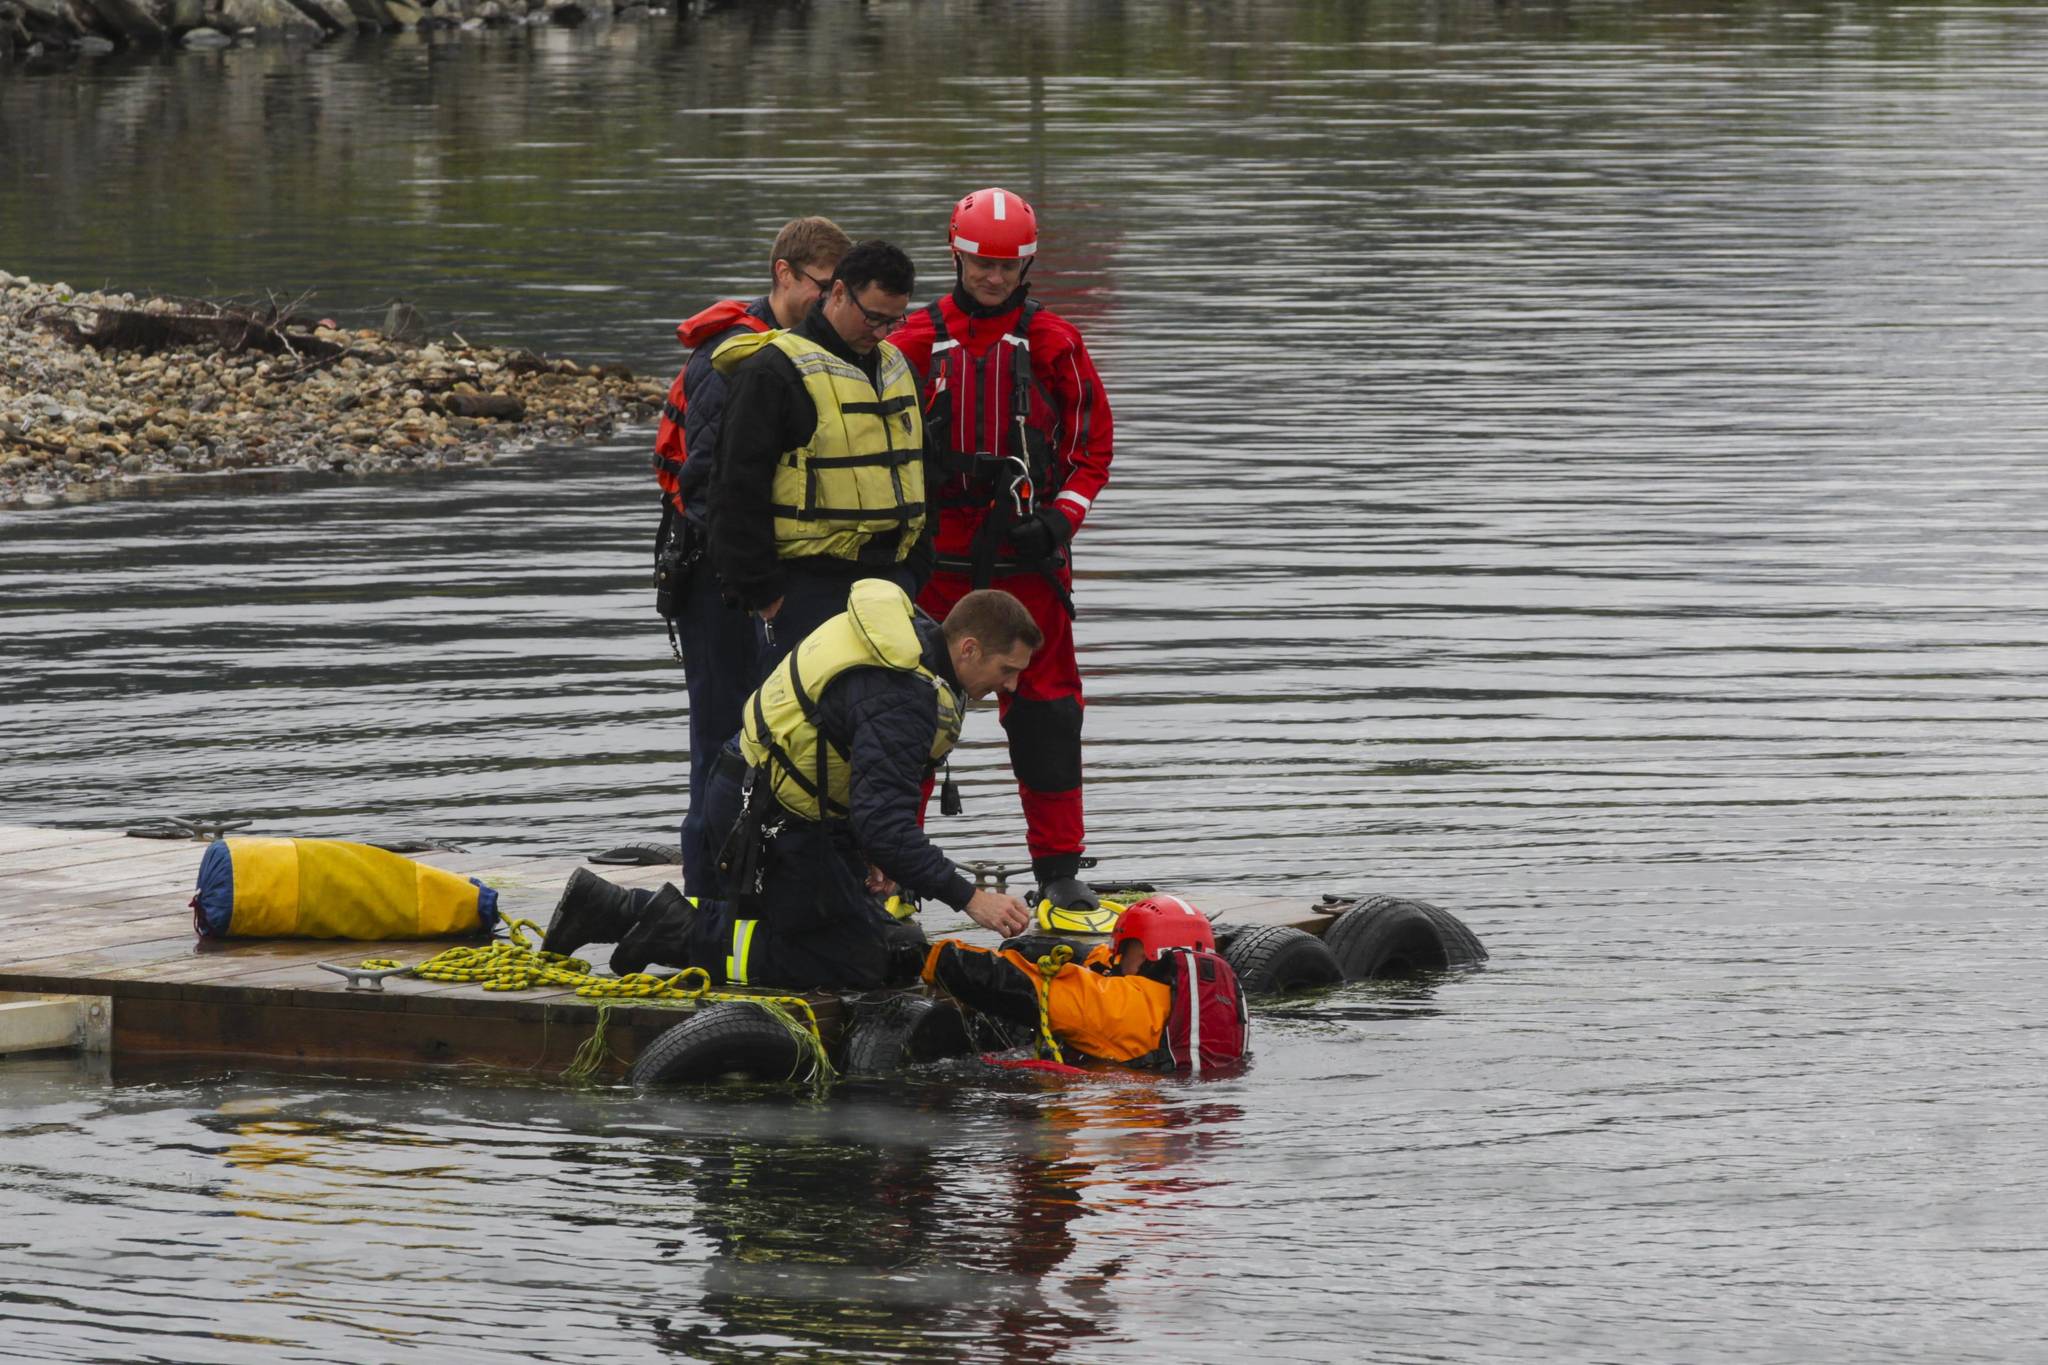 Capital City Fire/Rescue personnel underwent water rescue training at the floatplane pond Sunday at Juneau International Airport.
Michael S. Lockett / Juneau Empire